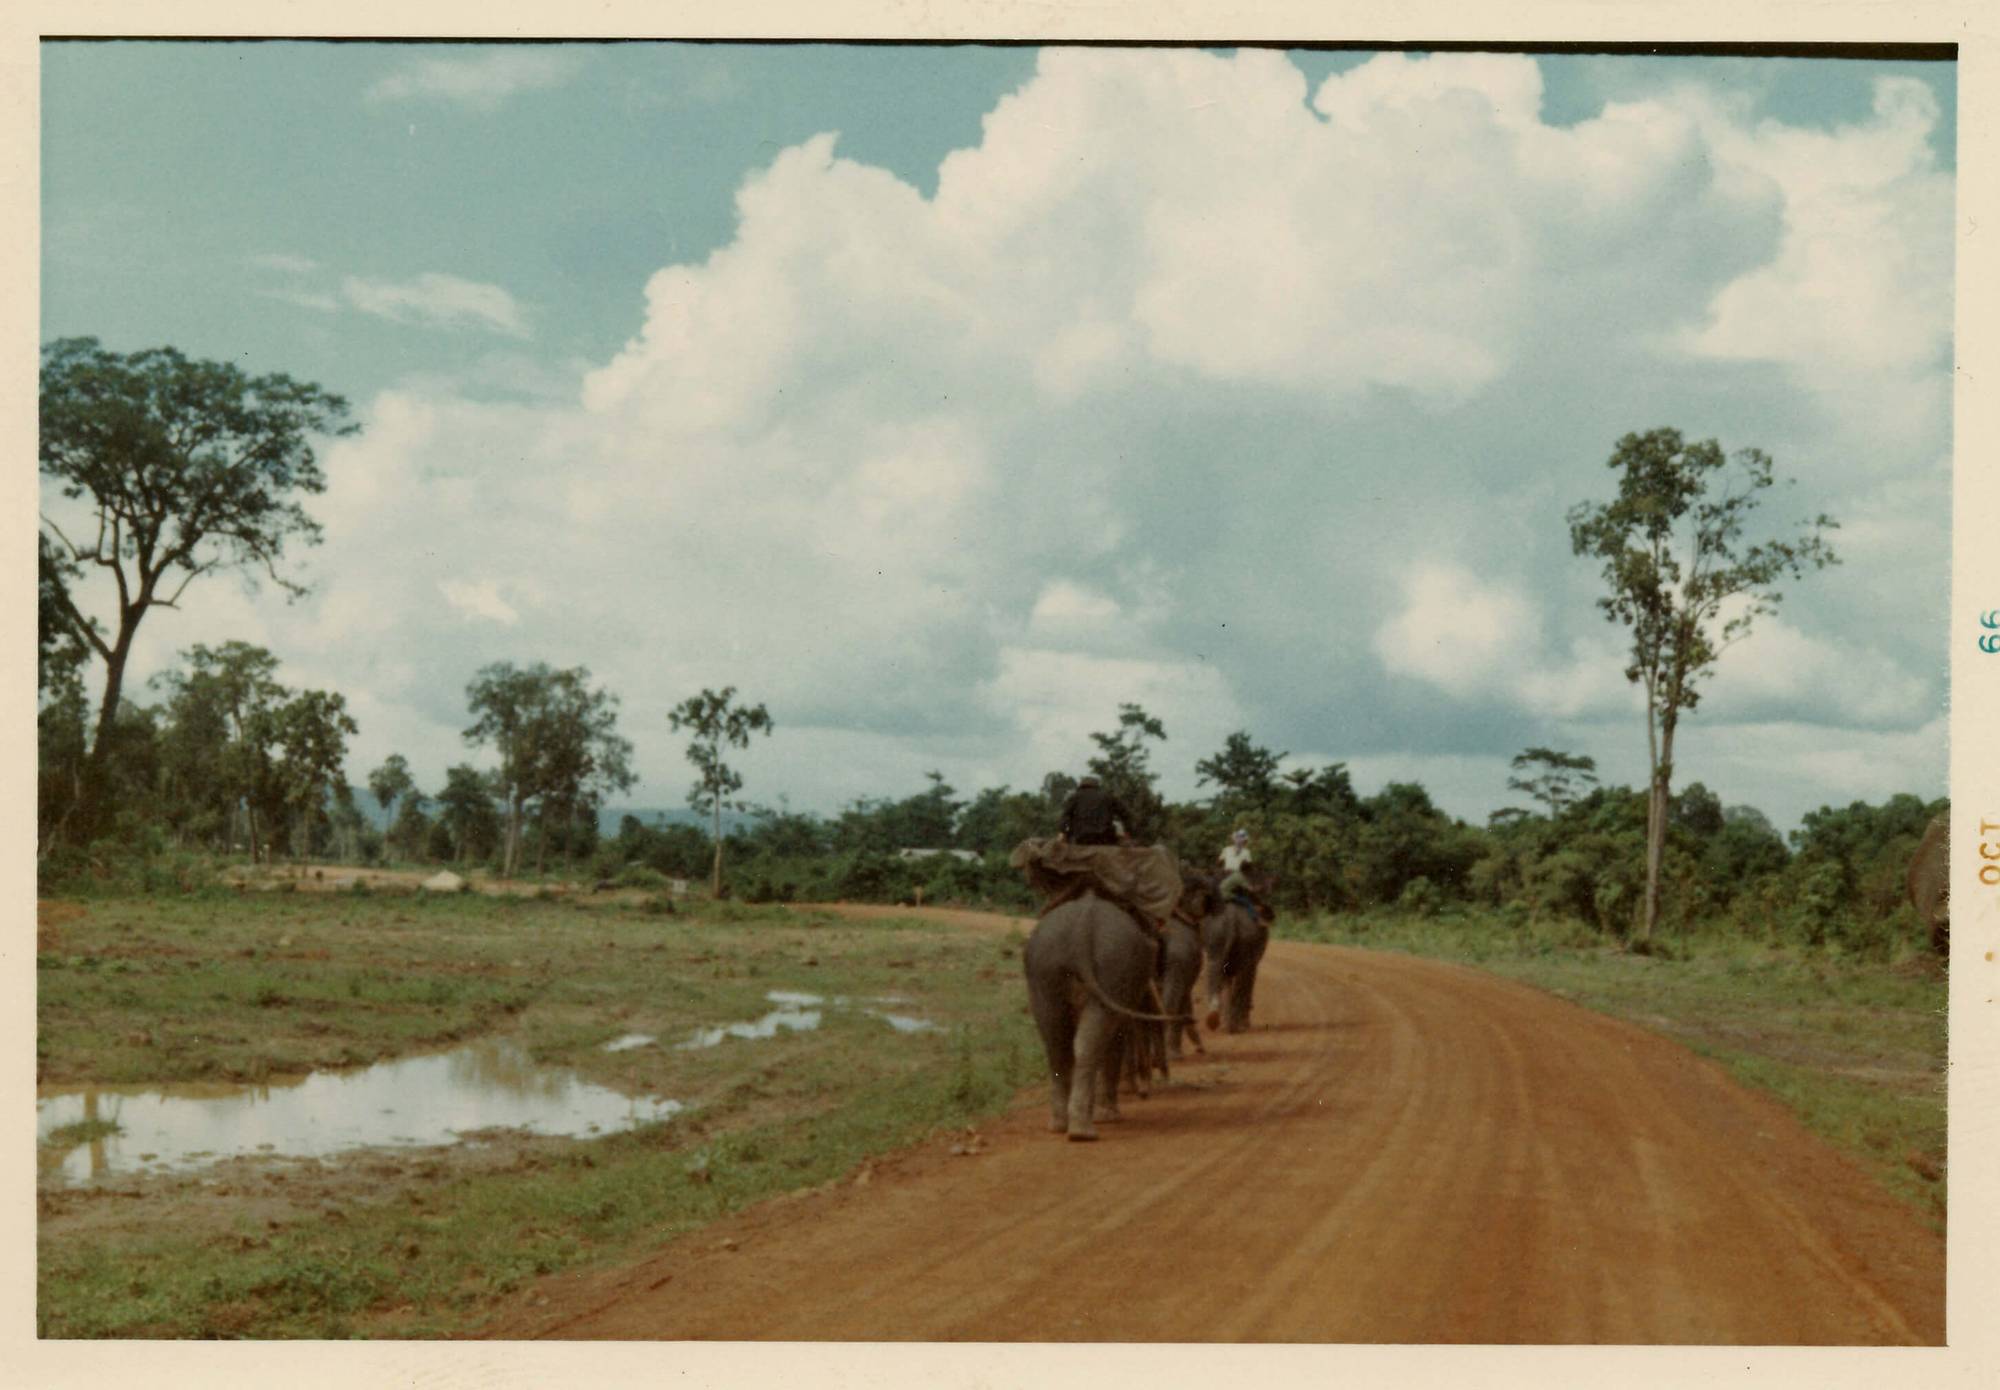 Three elephants and riders walking along a dirt road in a lush setting. Margins indicate the photo was taken October 1966.